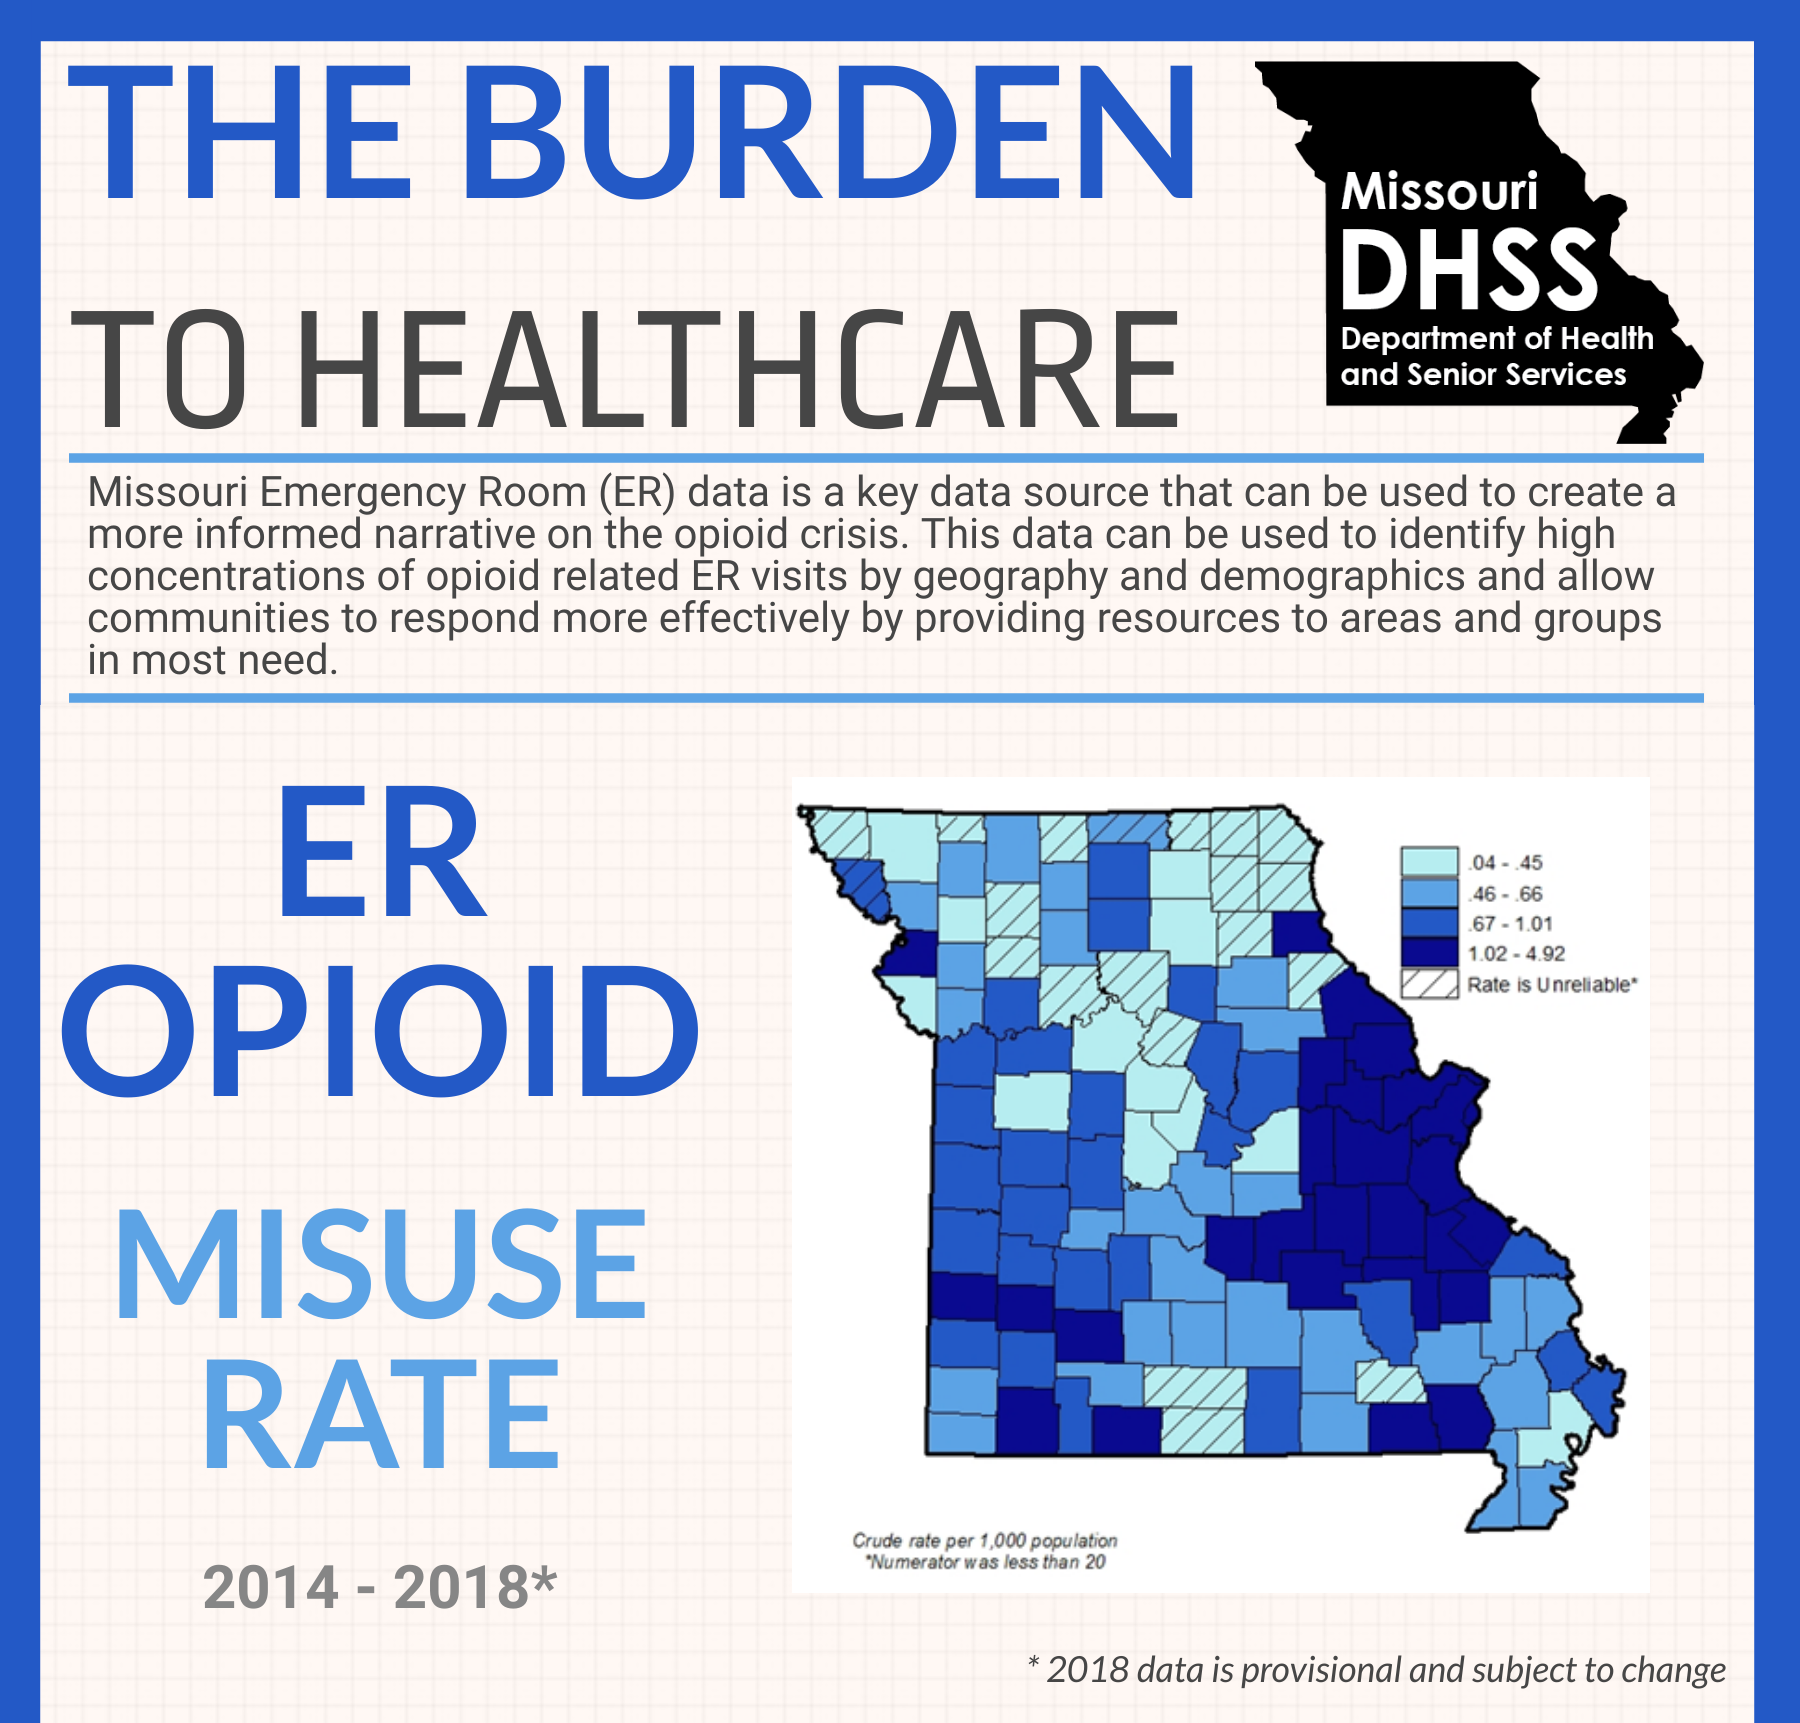 the burden to healthcare er opioid misuse rate image